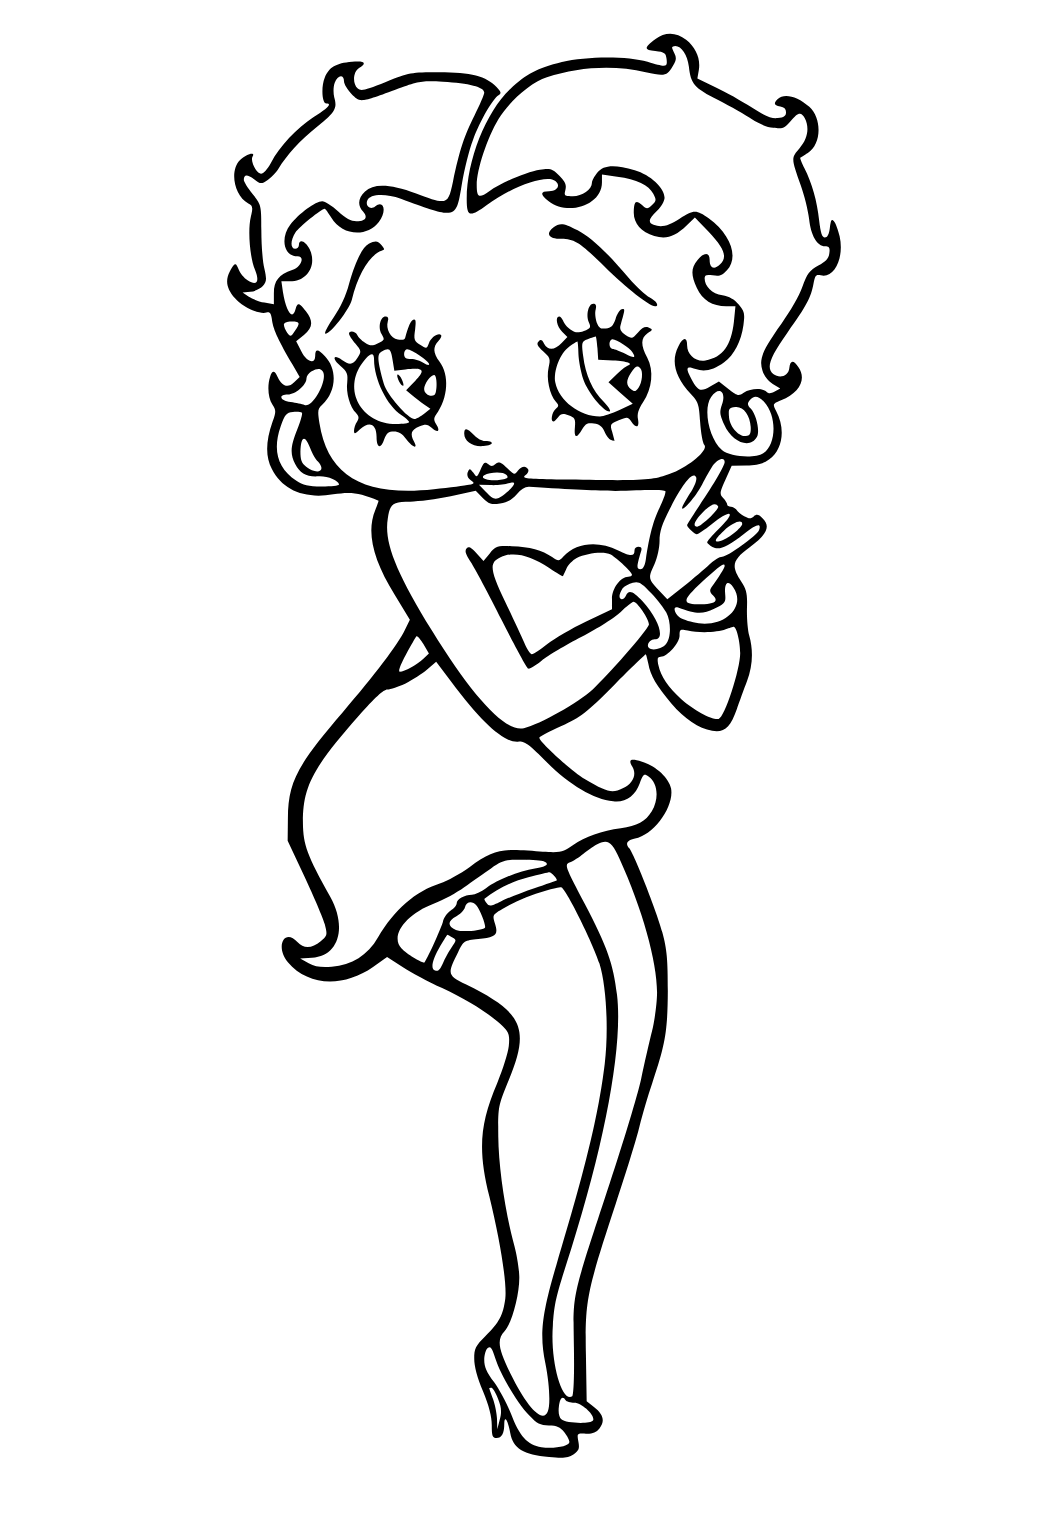 Free printable betty boop dress coloring page for adults and kids